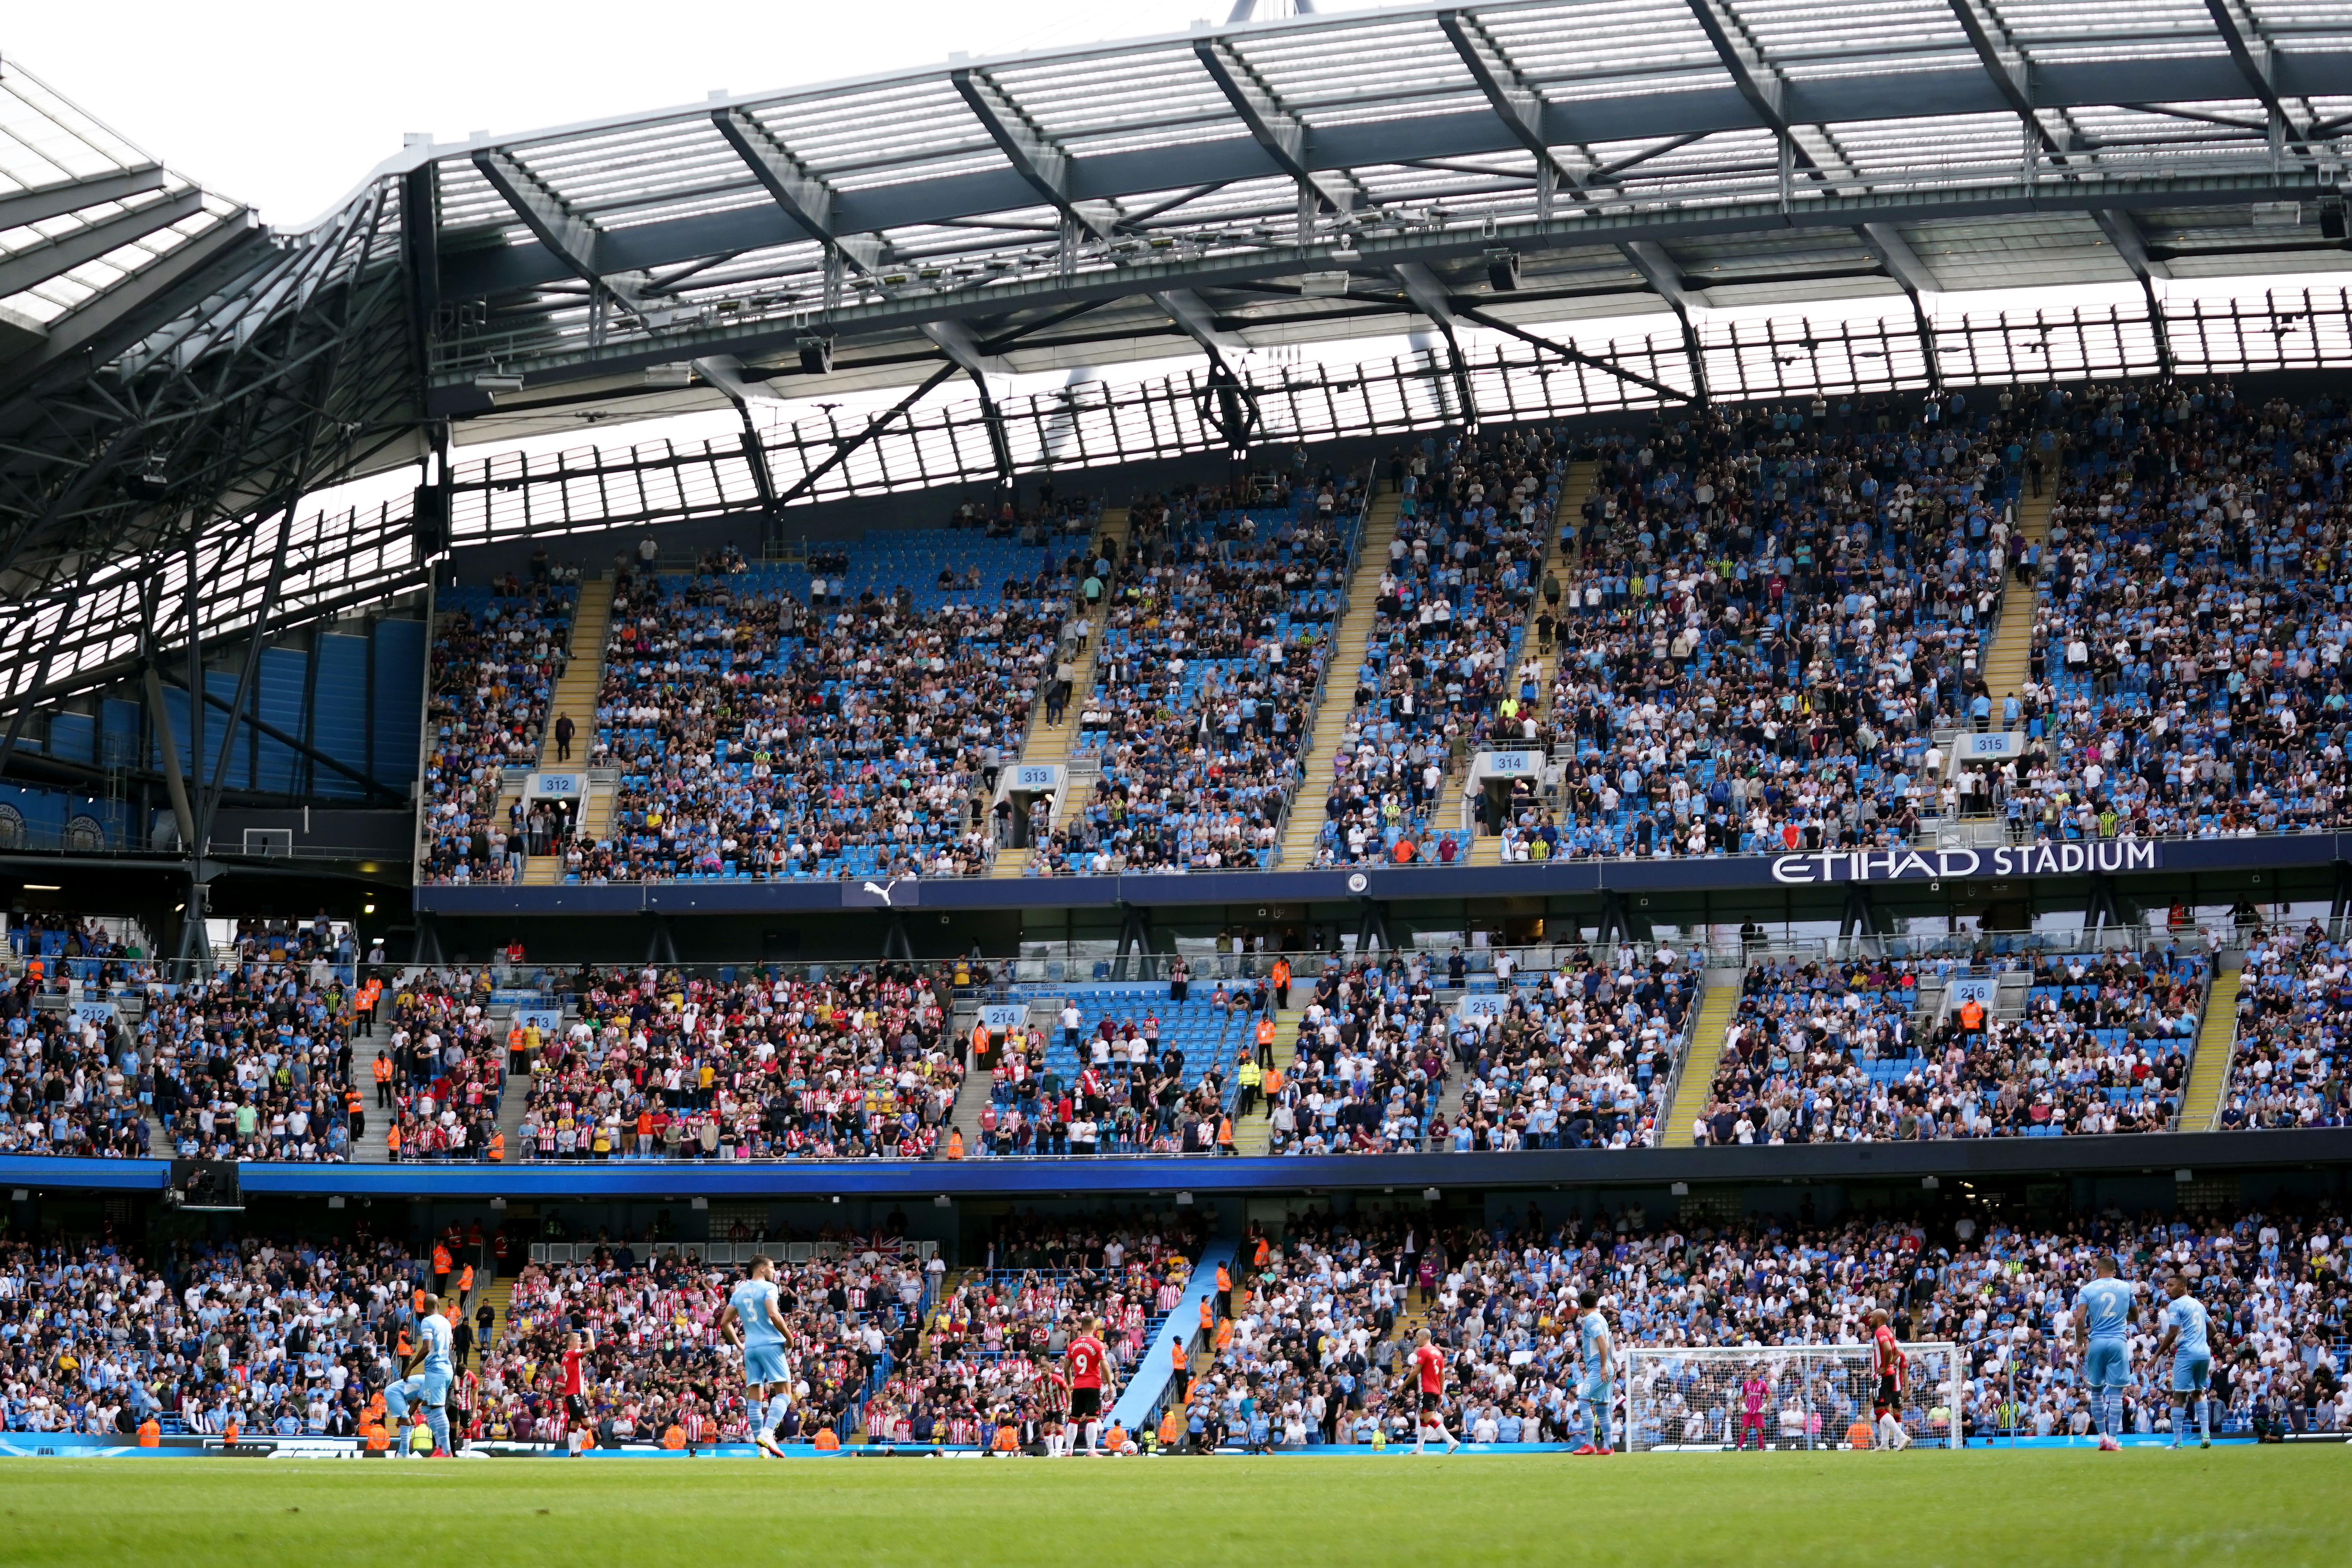 Liverpool have challenged Manchester City and the Premier League after receiving a reduced ticket allocation for their match at the Etihad next month (Zac Goodwin/PA)